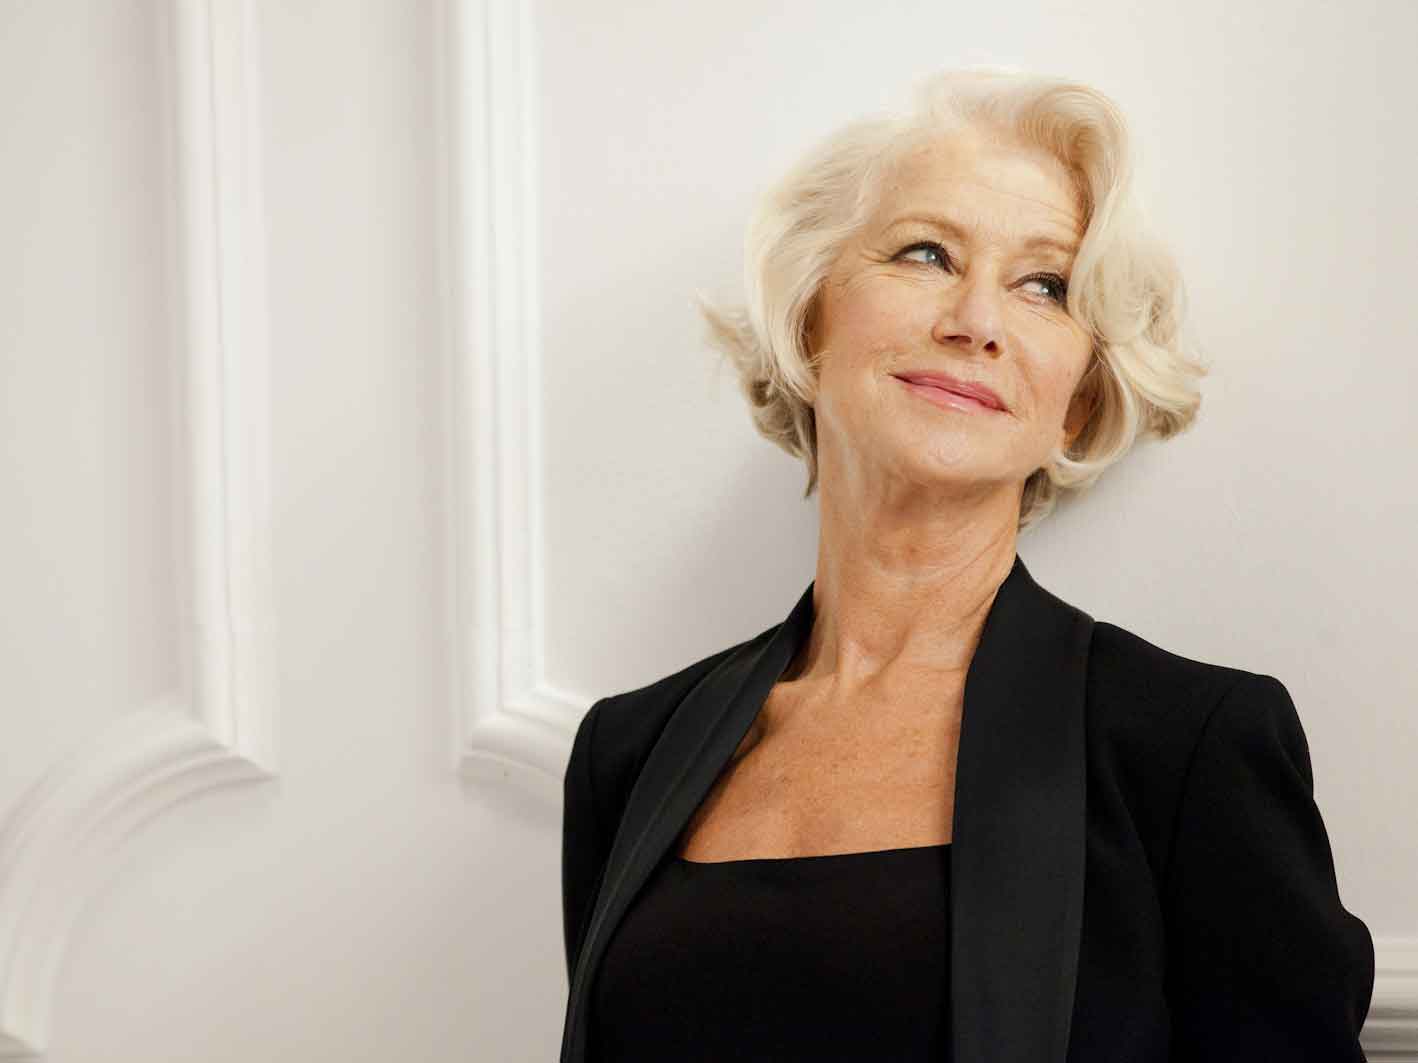 Helen Mirren is the new face of L'Oreal Paris